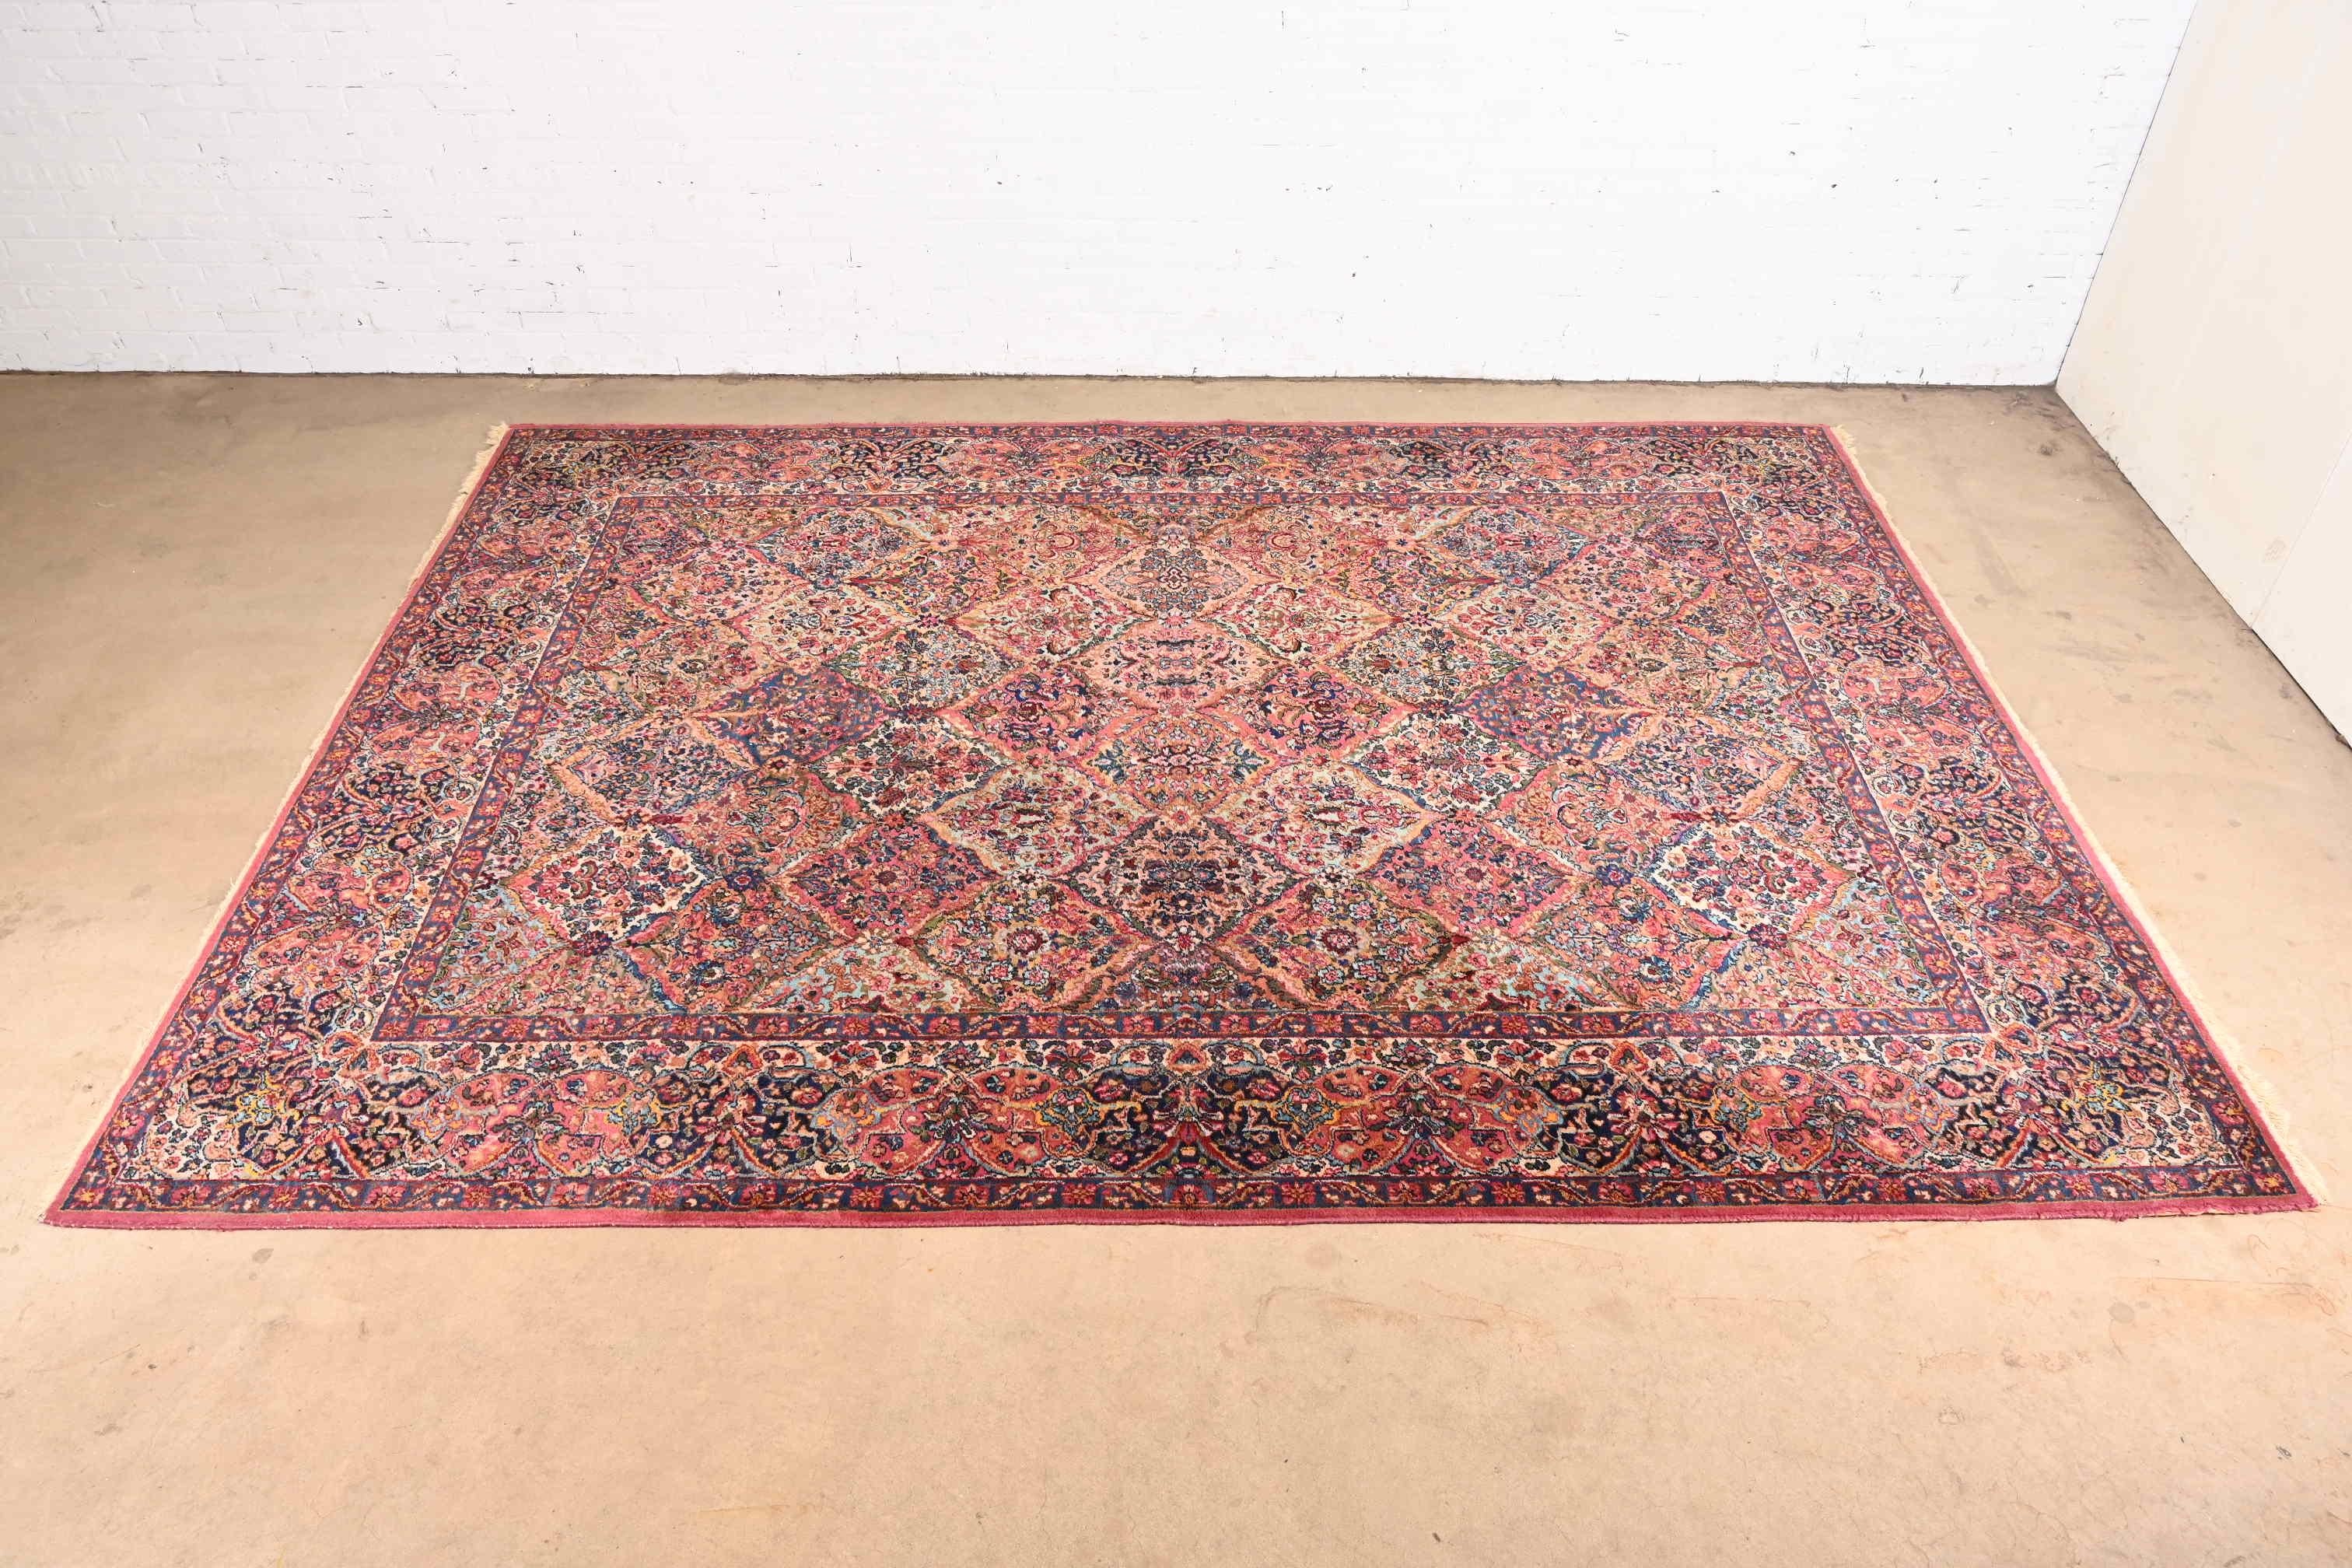 A gorgeous Persian Kirman style room size rug

By Karastan

USA, circa 1940s

Features a beautiful all-over patchwork pattern containing myriad flowers woven in myriad colors across the field, and surrounded by a border of similar pattern and